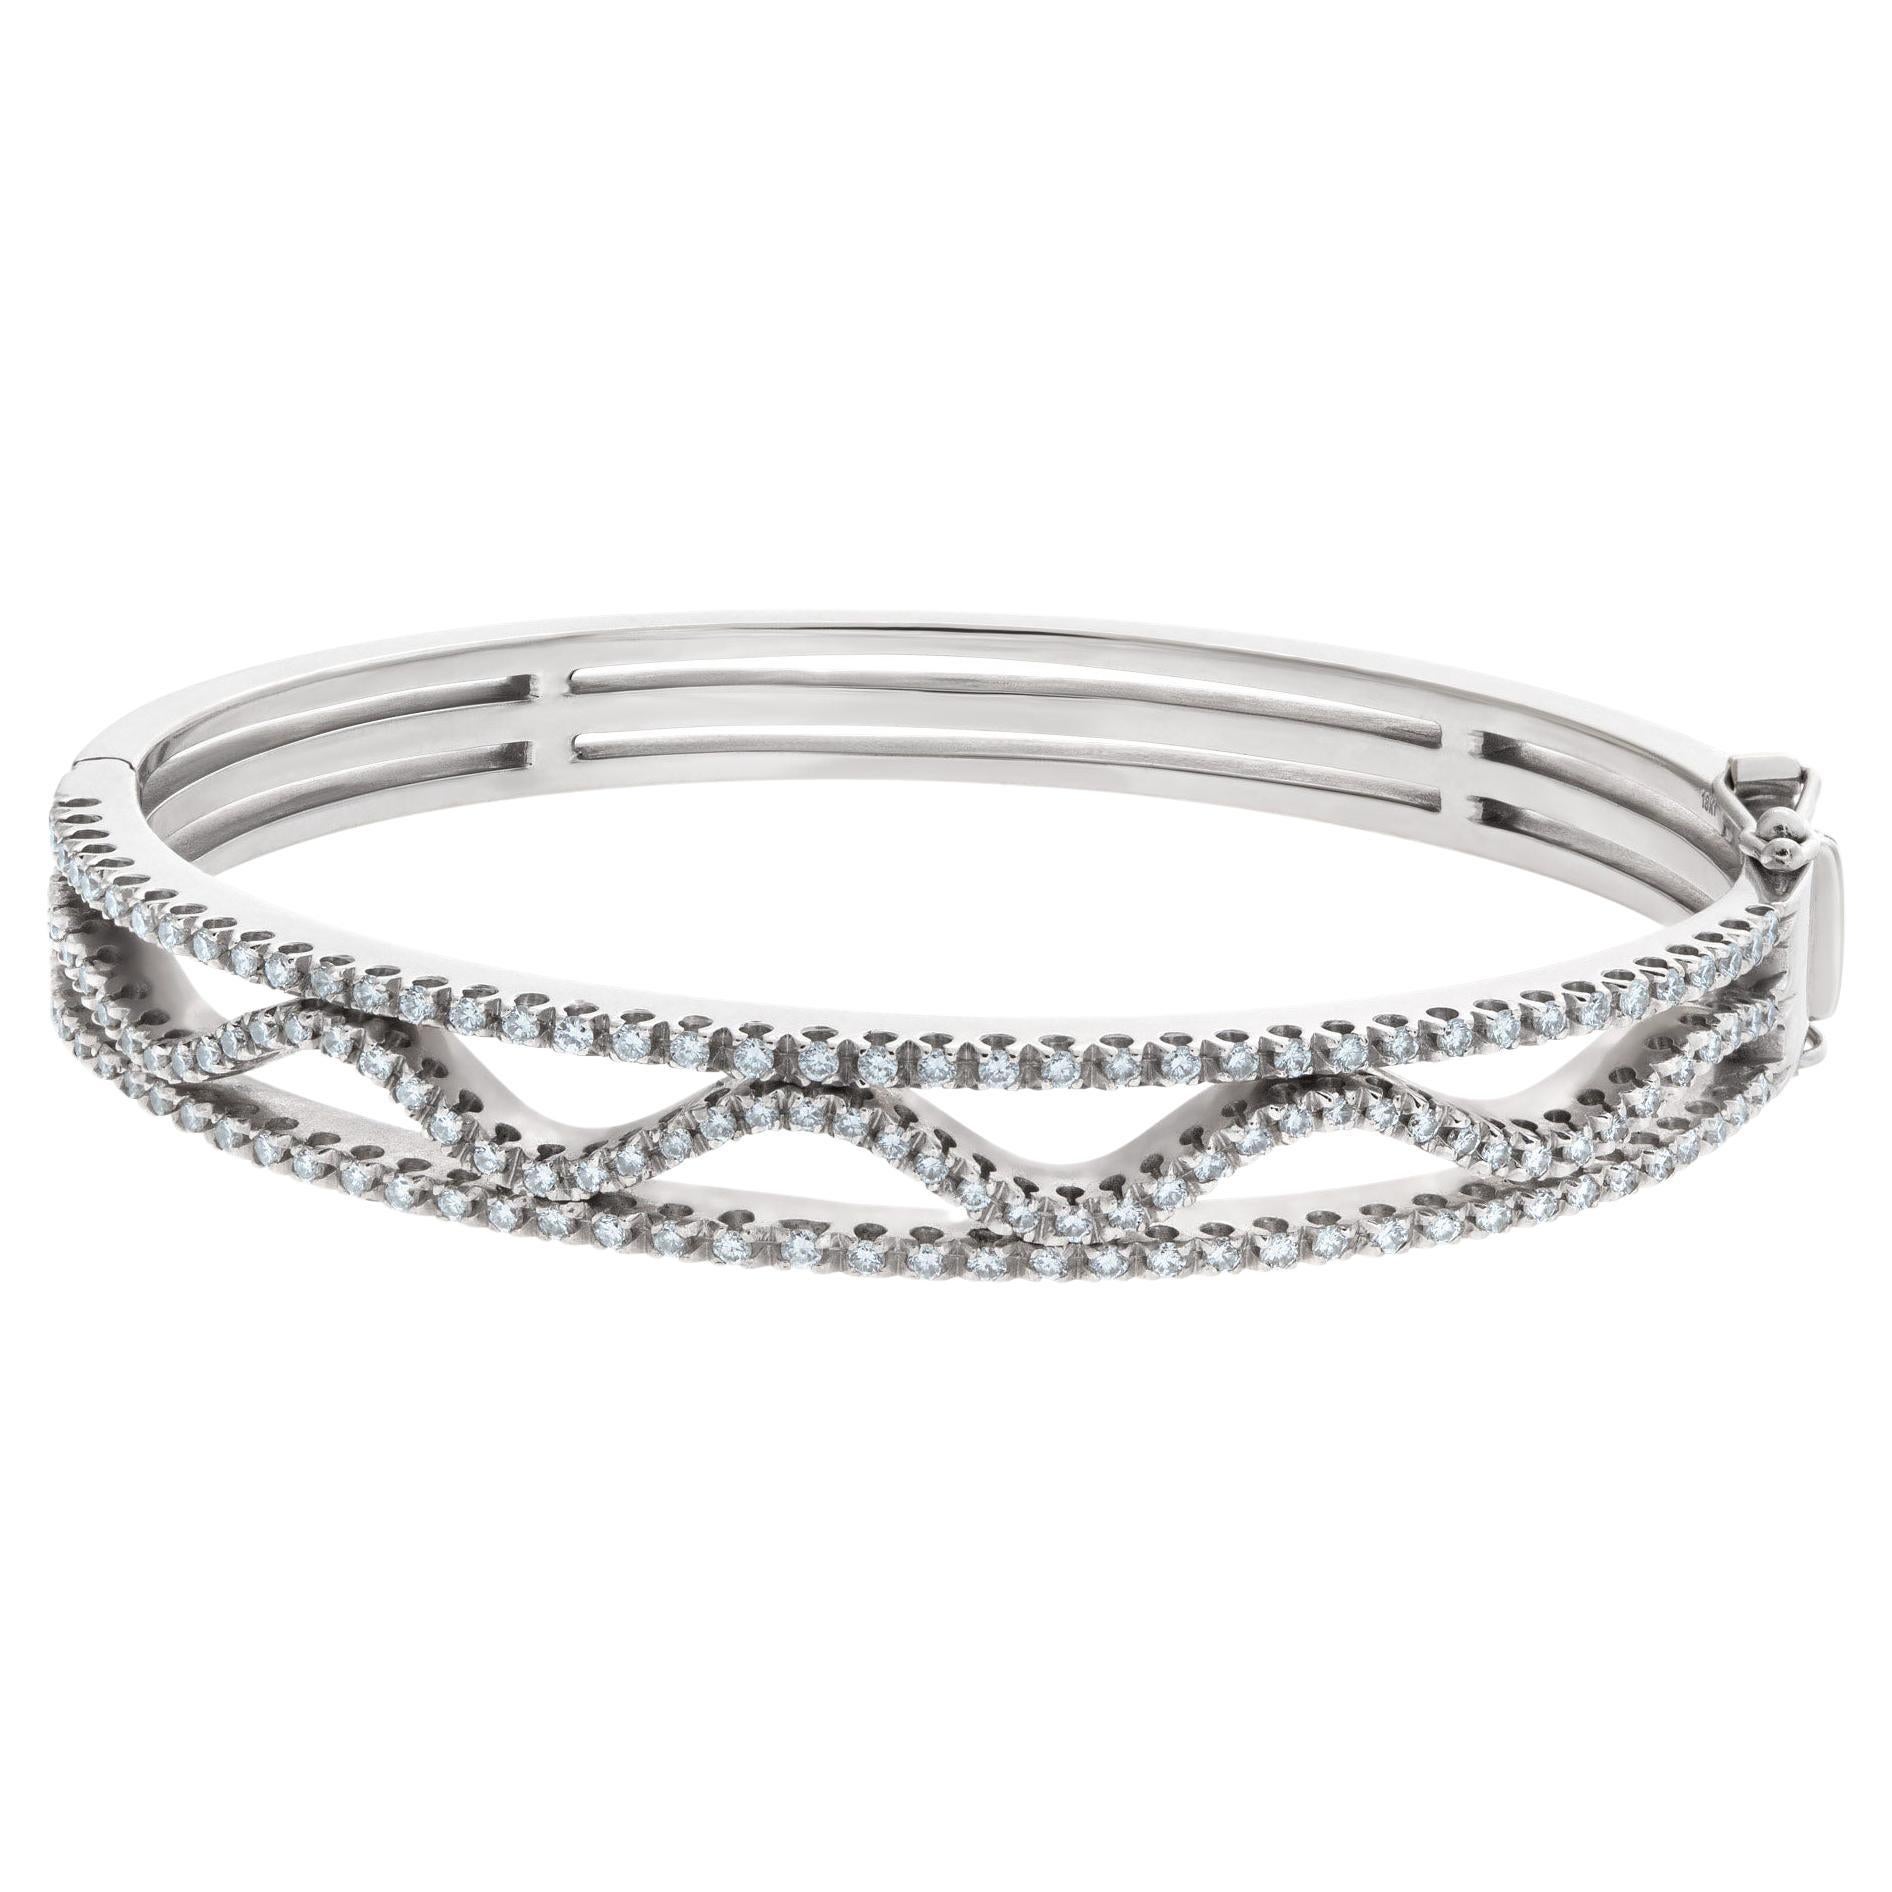 Diamond Wave Bangle in 14k White Gold with Approximately 2 Carats